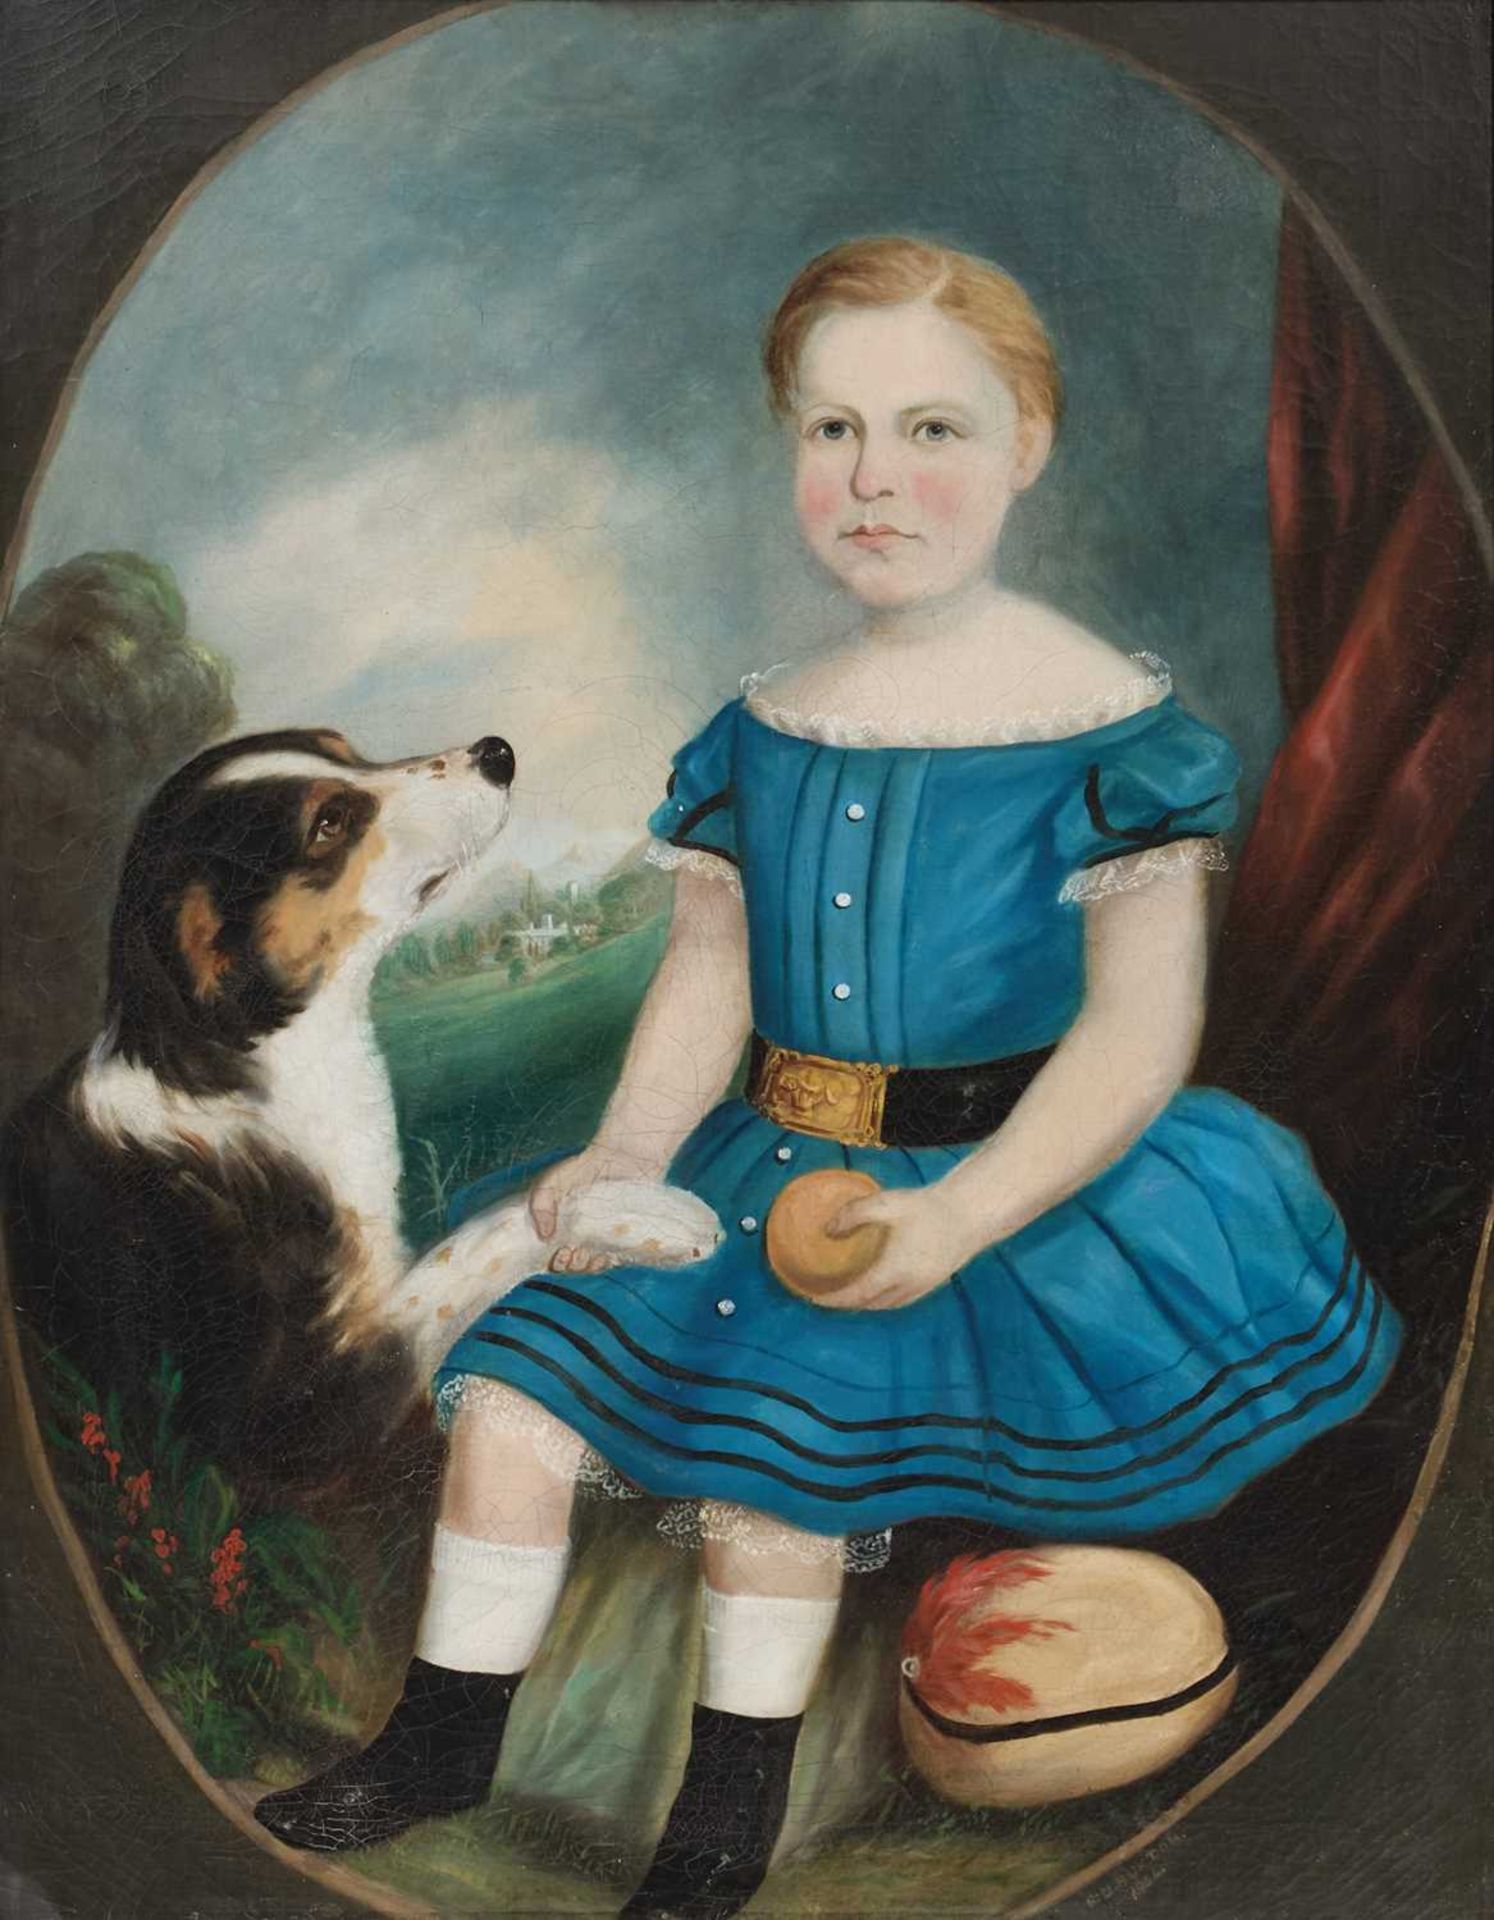 19TH CENTURY NAIVE SCHOOL PORTRAIT OF A GIRL AND HER DOG